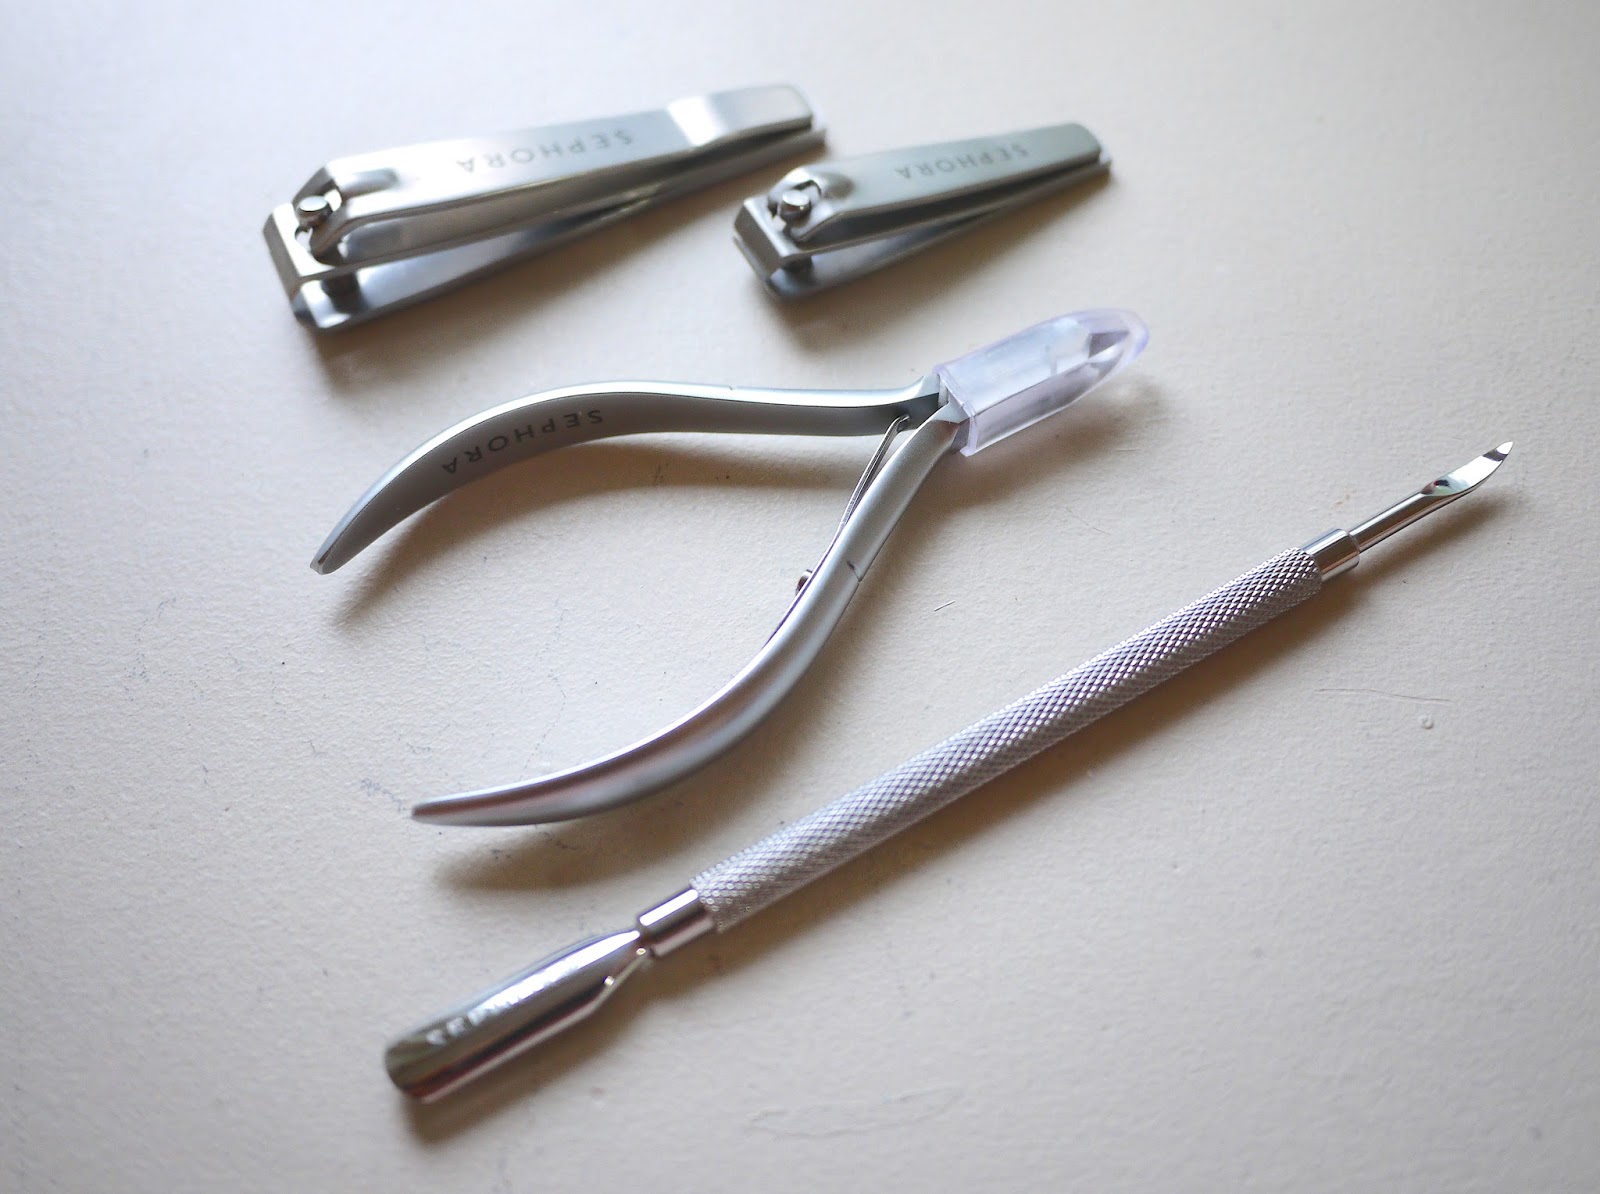 sephora nail and manicure tools review